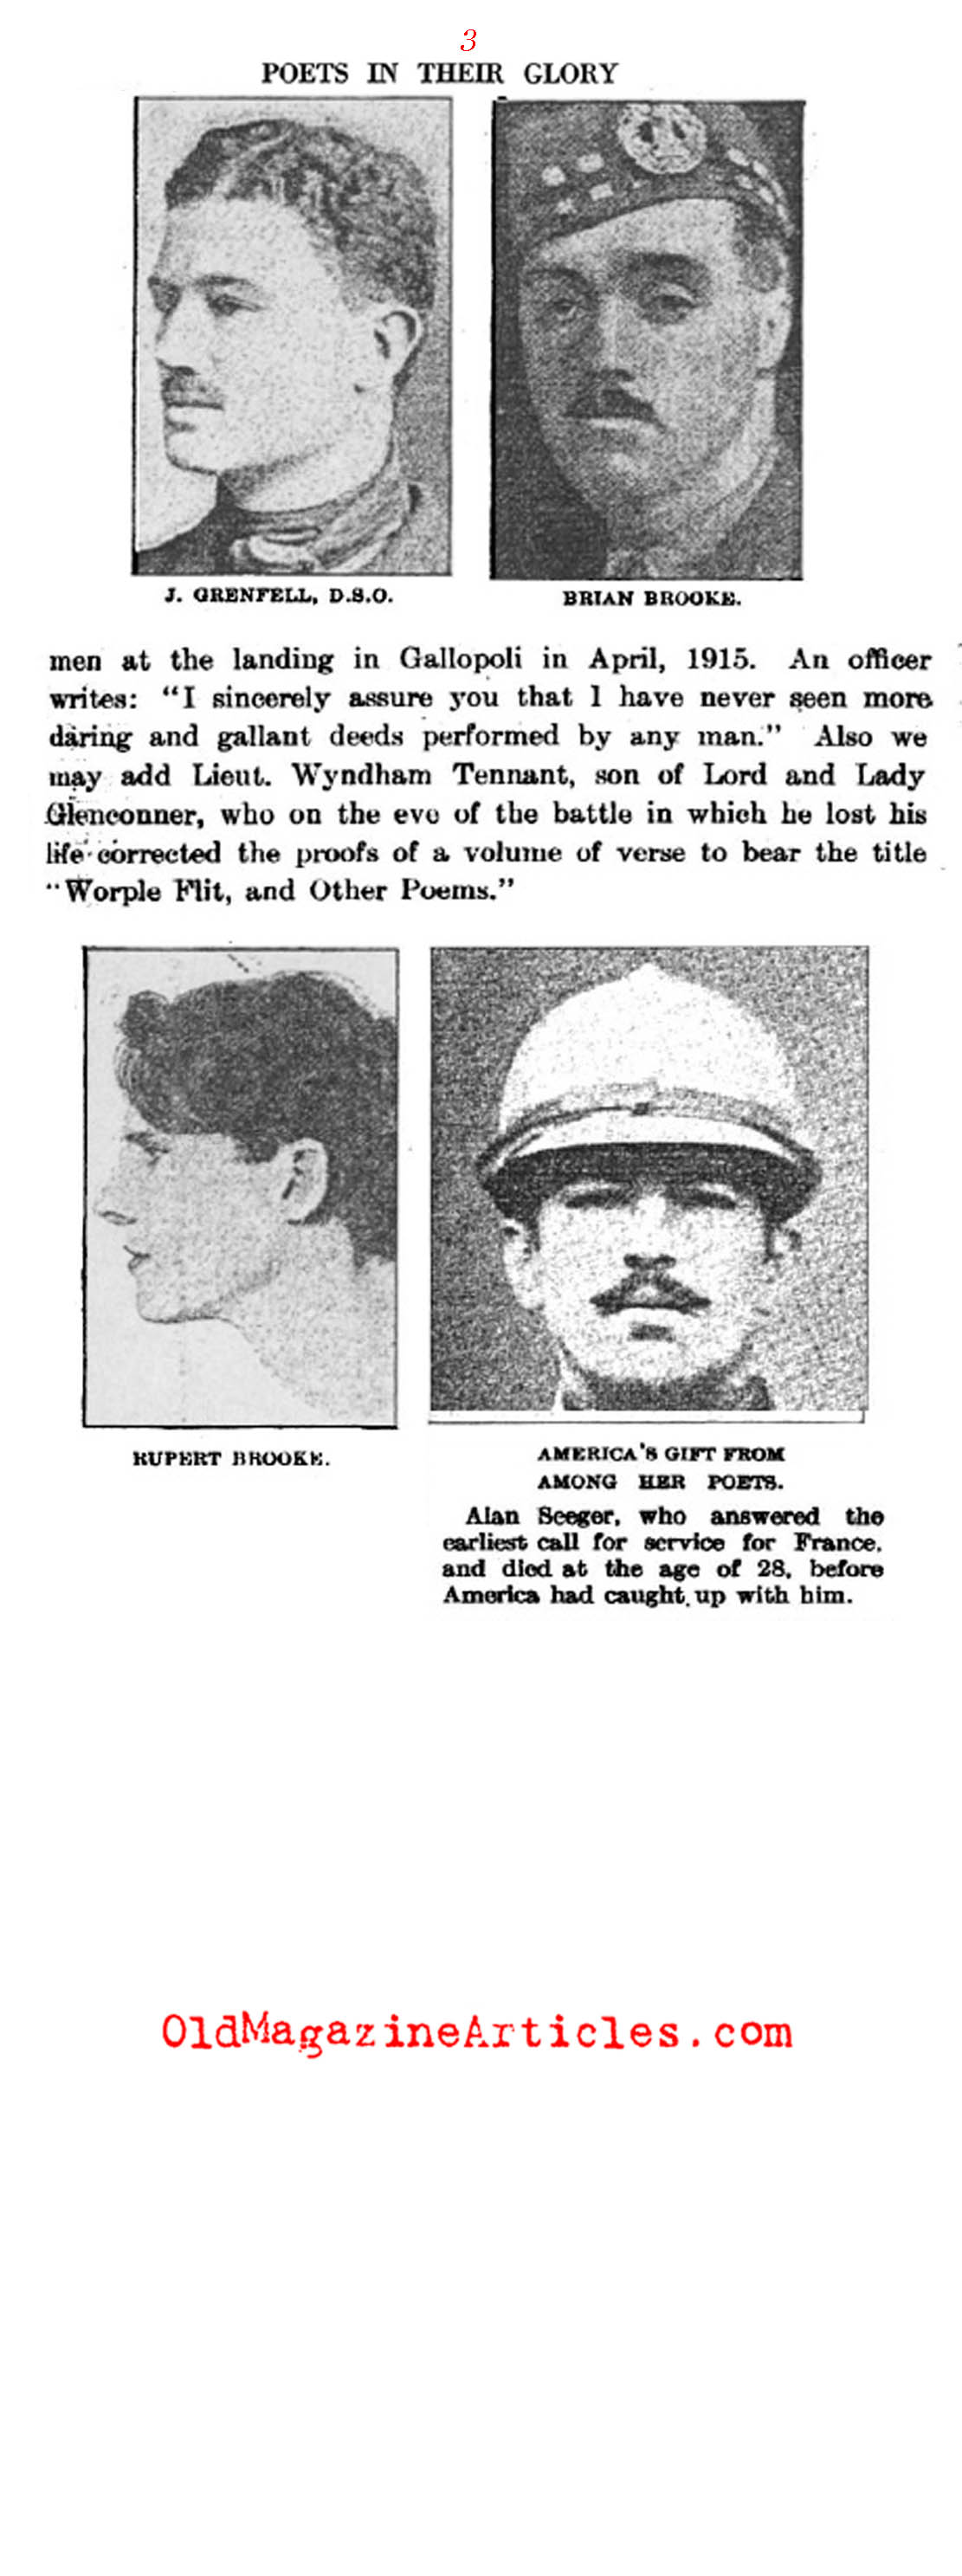 Poets in Their Glory: Dead (Literary Digest, 1917)